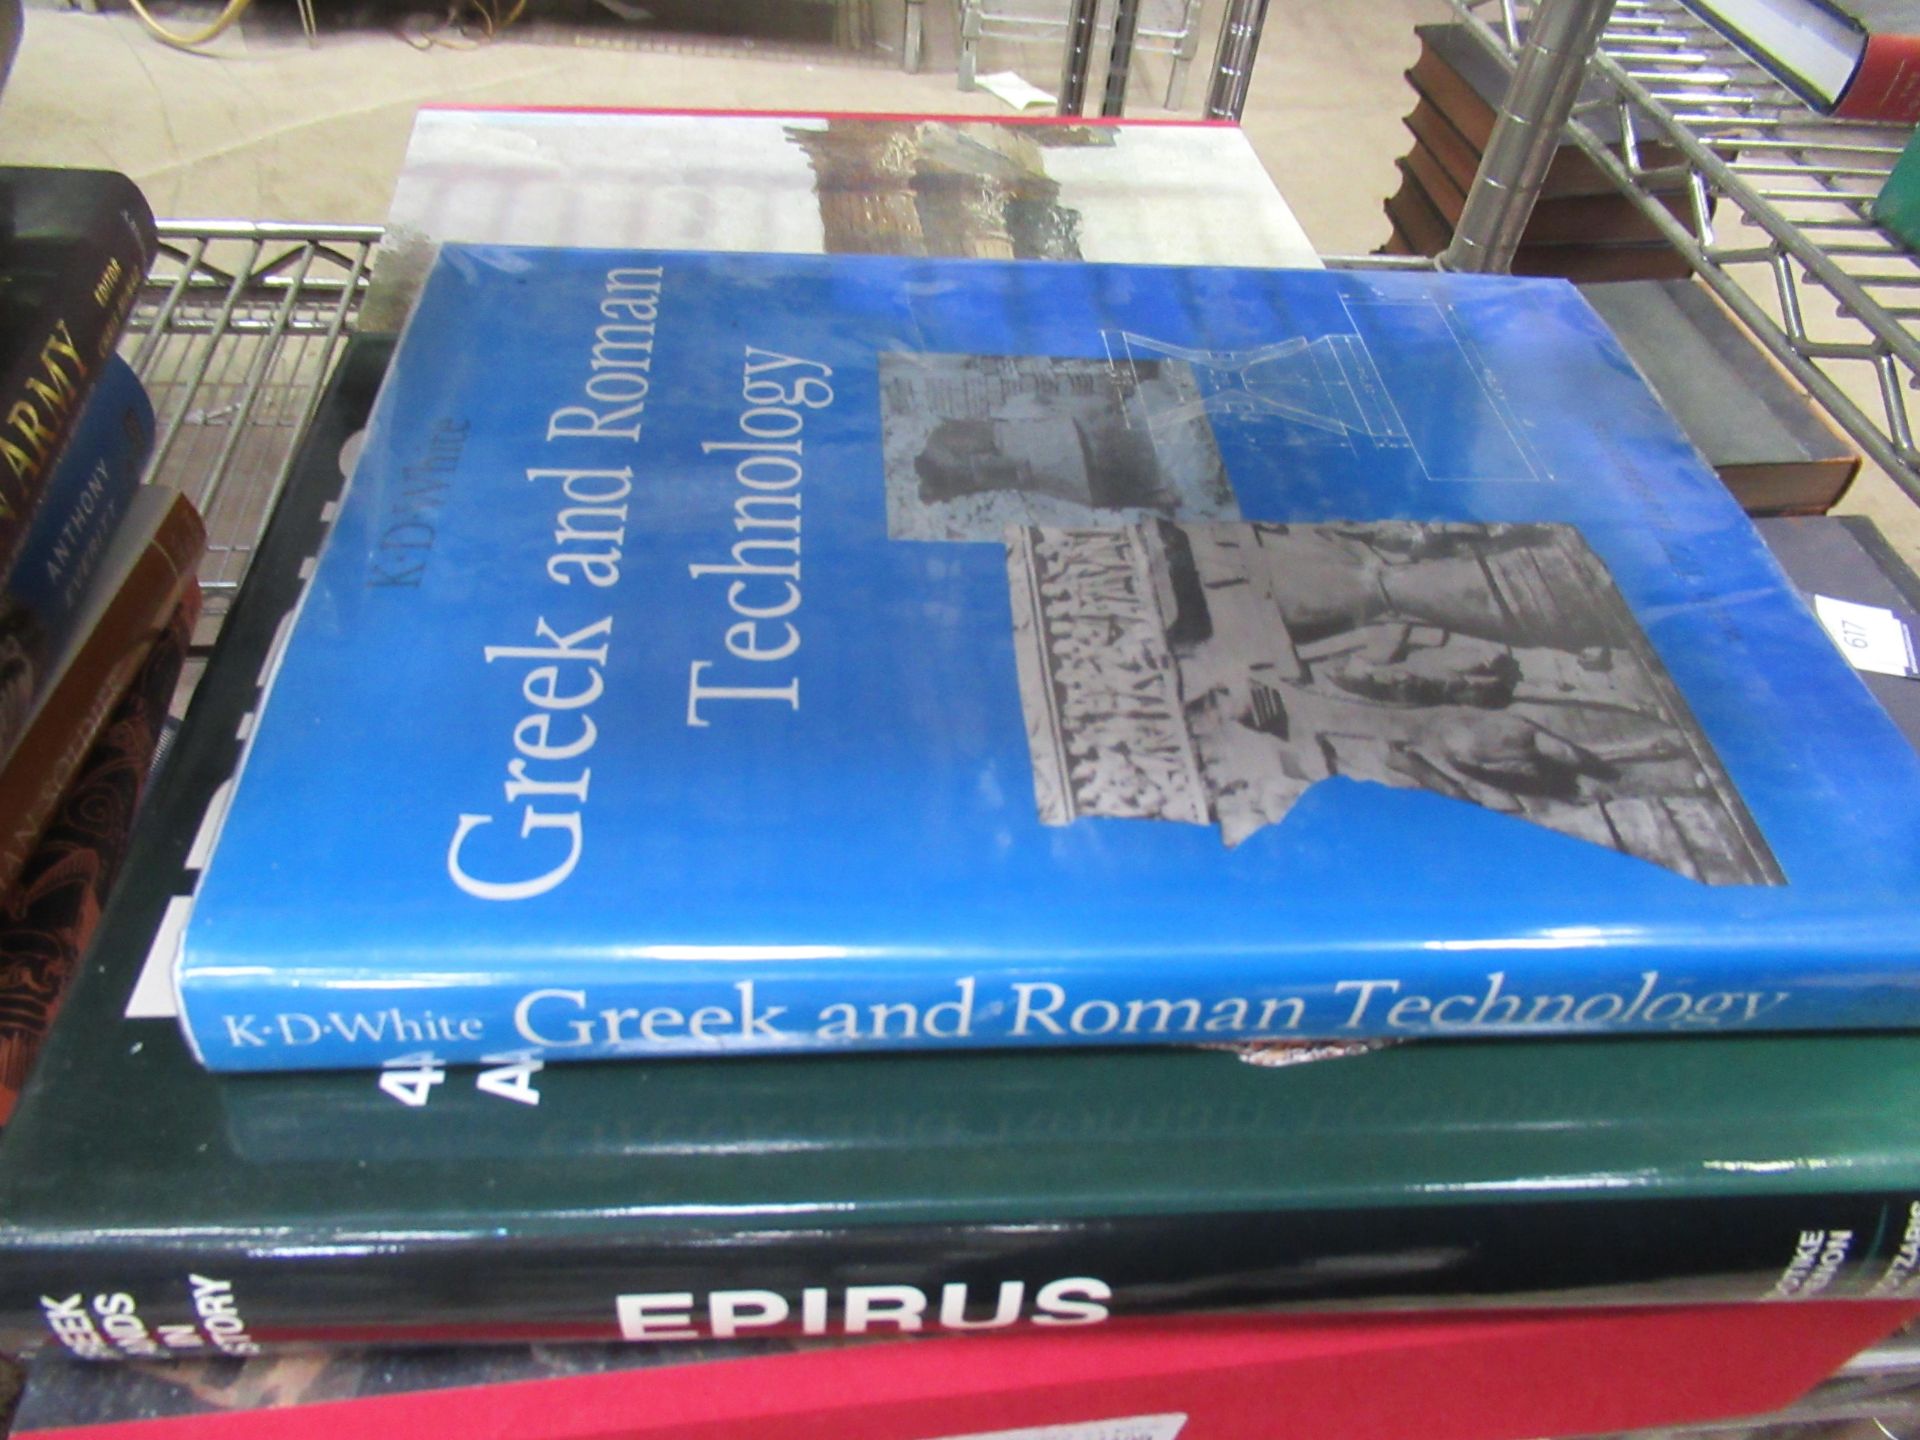 A selection of Roman/ Itaian history themed books including, 'The Sword of Rome', 'Death in Florence - Image 4 of 6